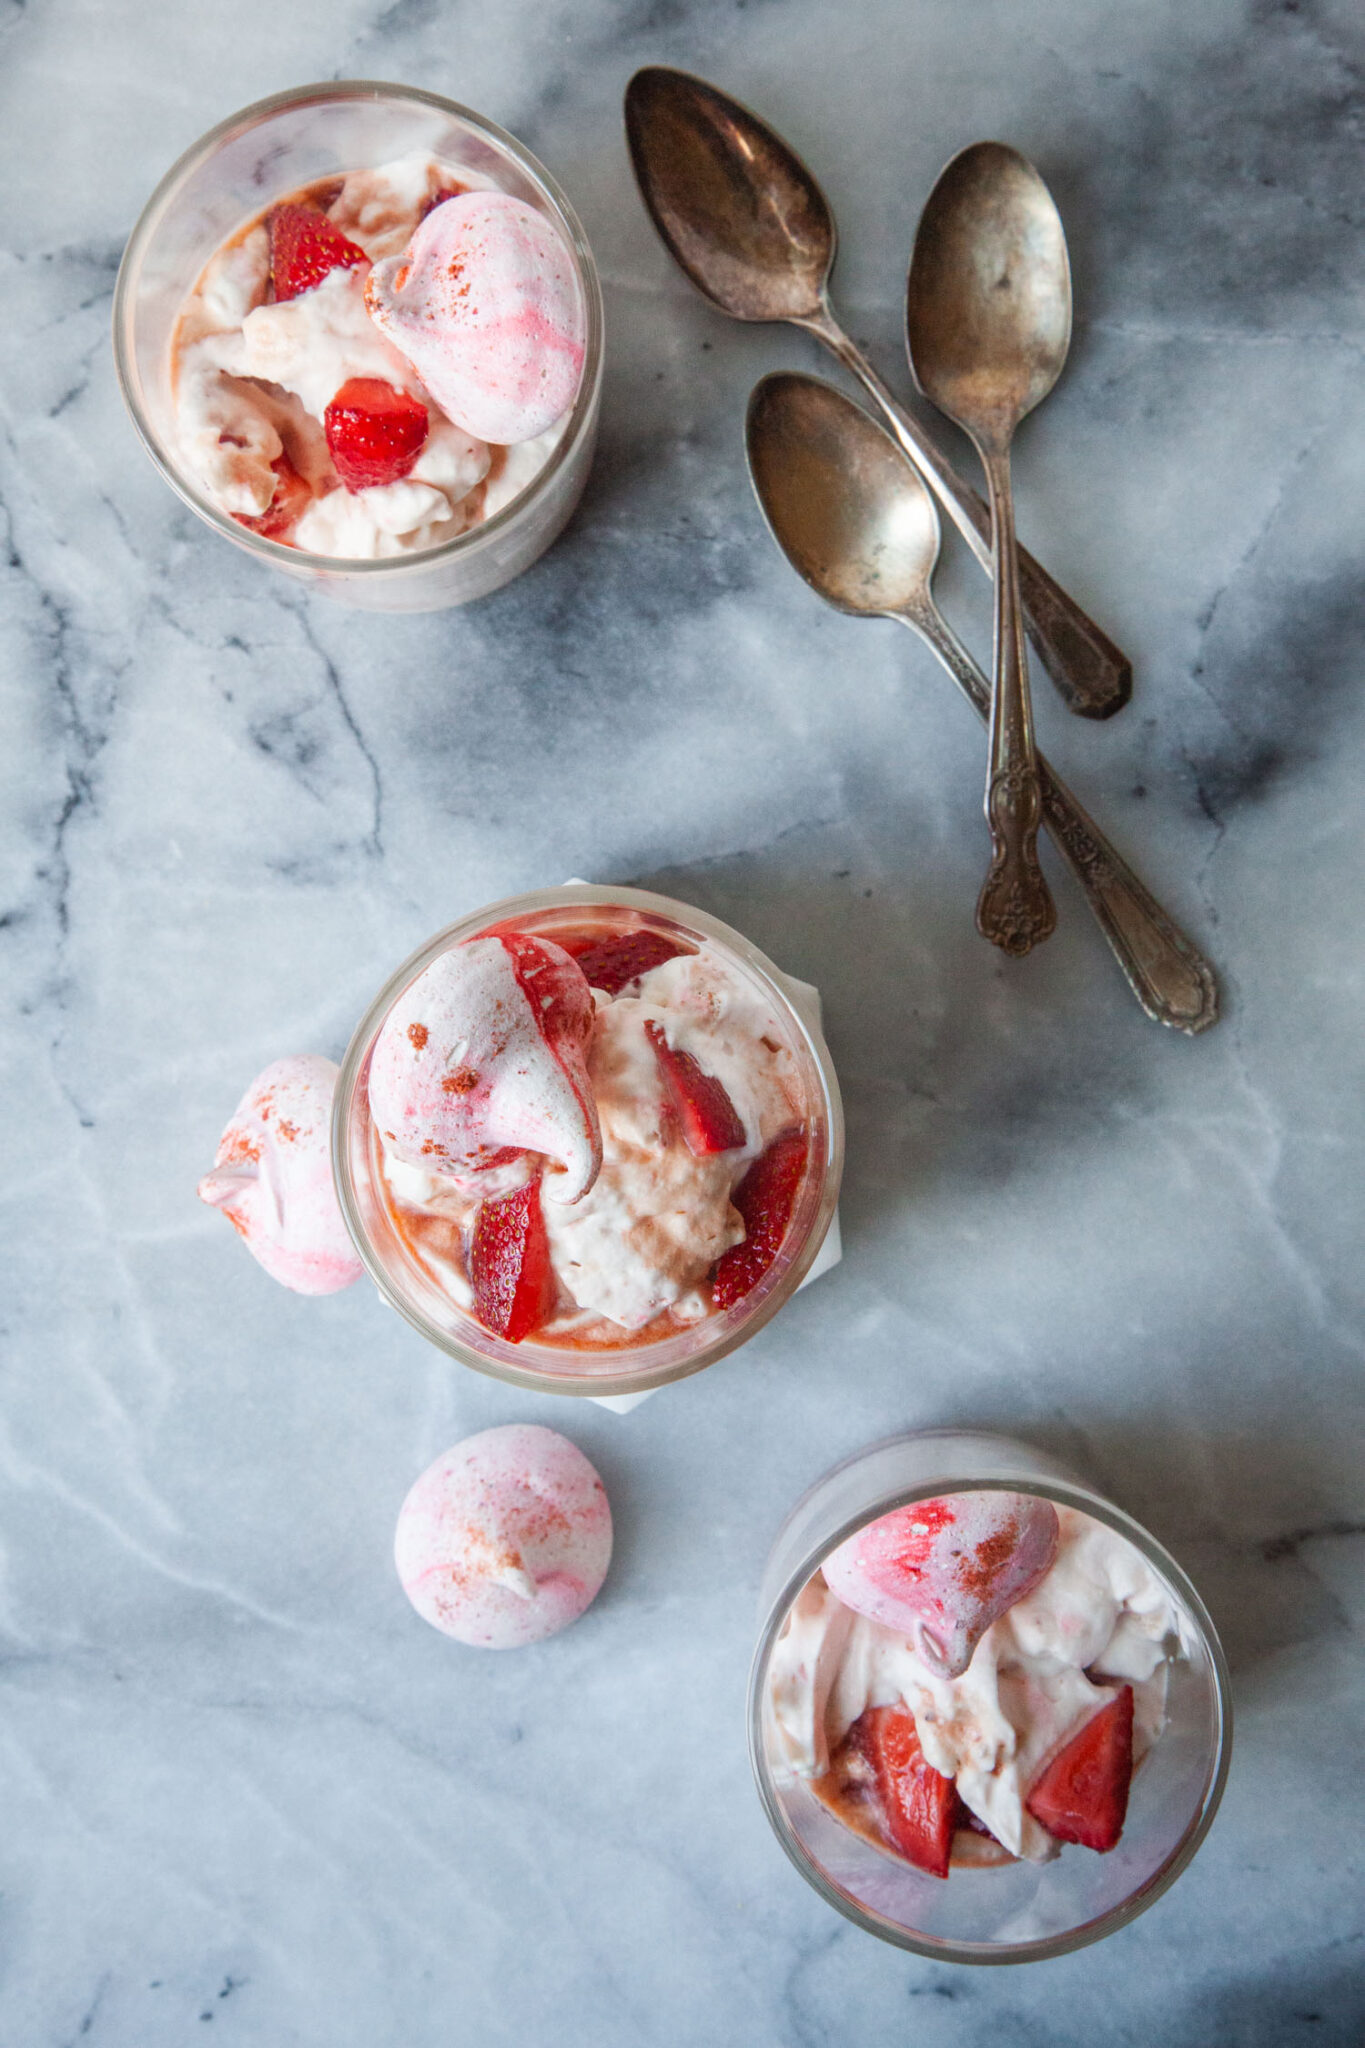 Three British Eton Mess desserts in double old fashion glasses, on a marble surface with spoons next to them. There are a couple of meringue cookies next to the glasses.